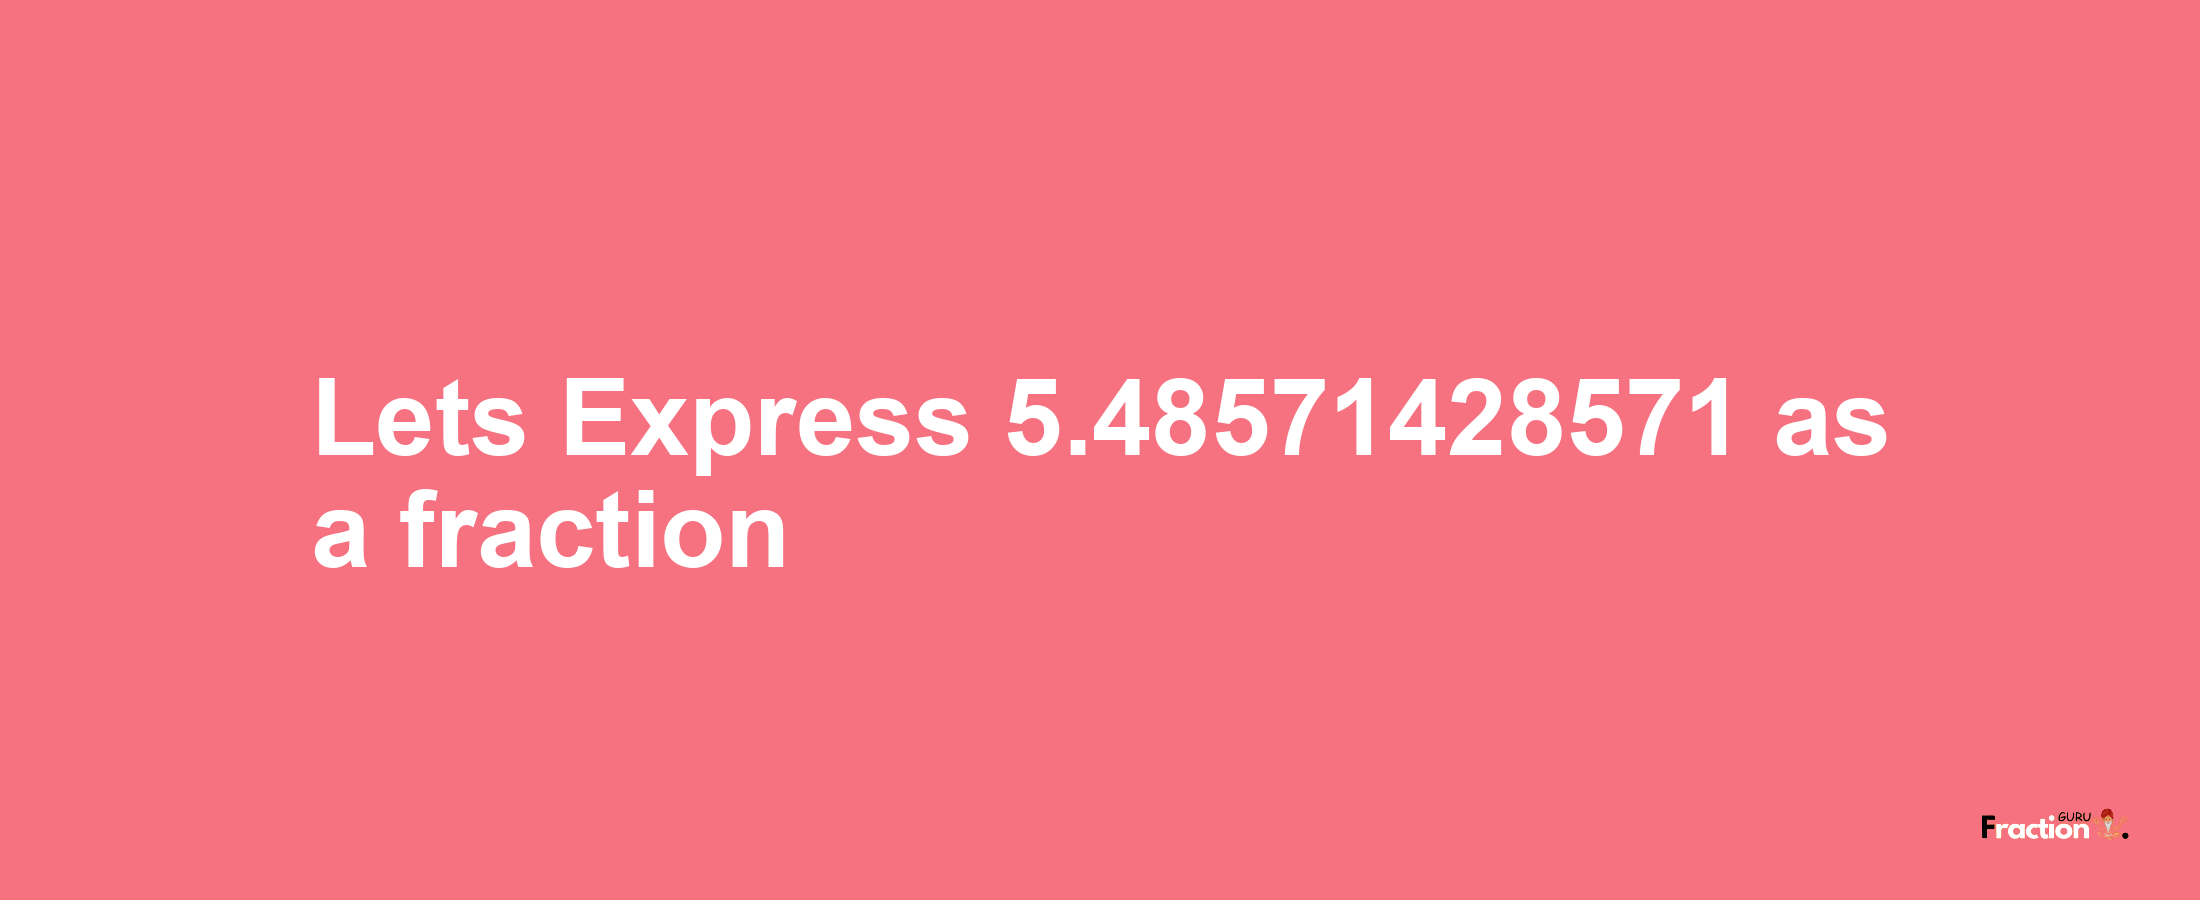 Lets Express 5.48571428571 as afraction